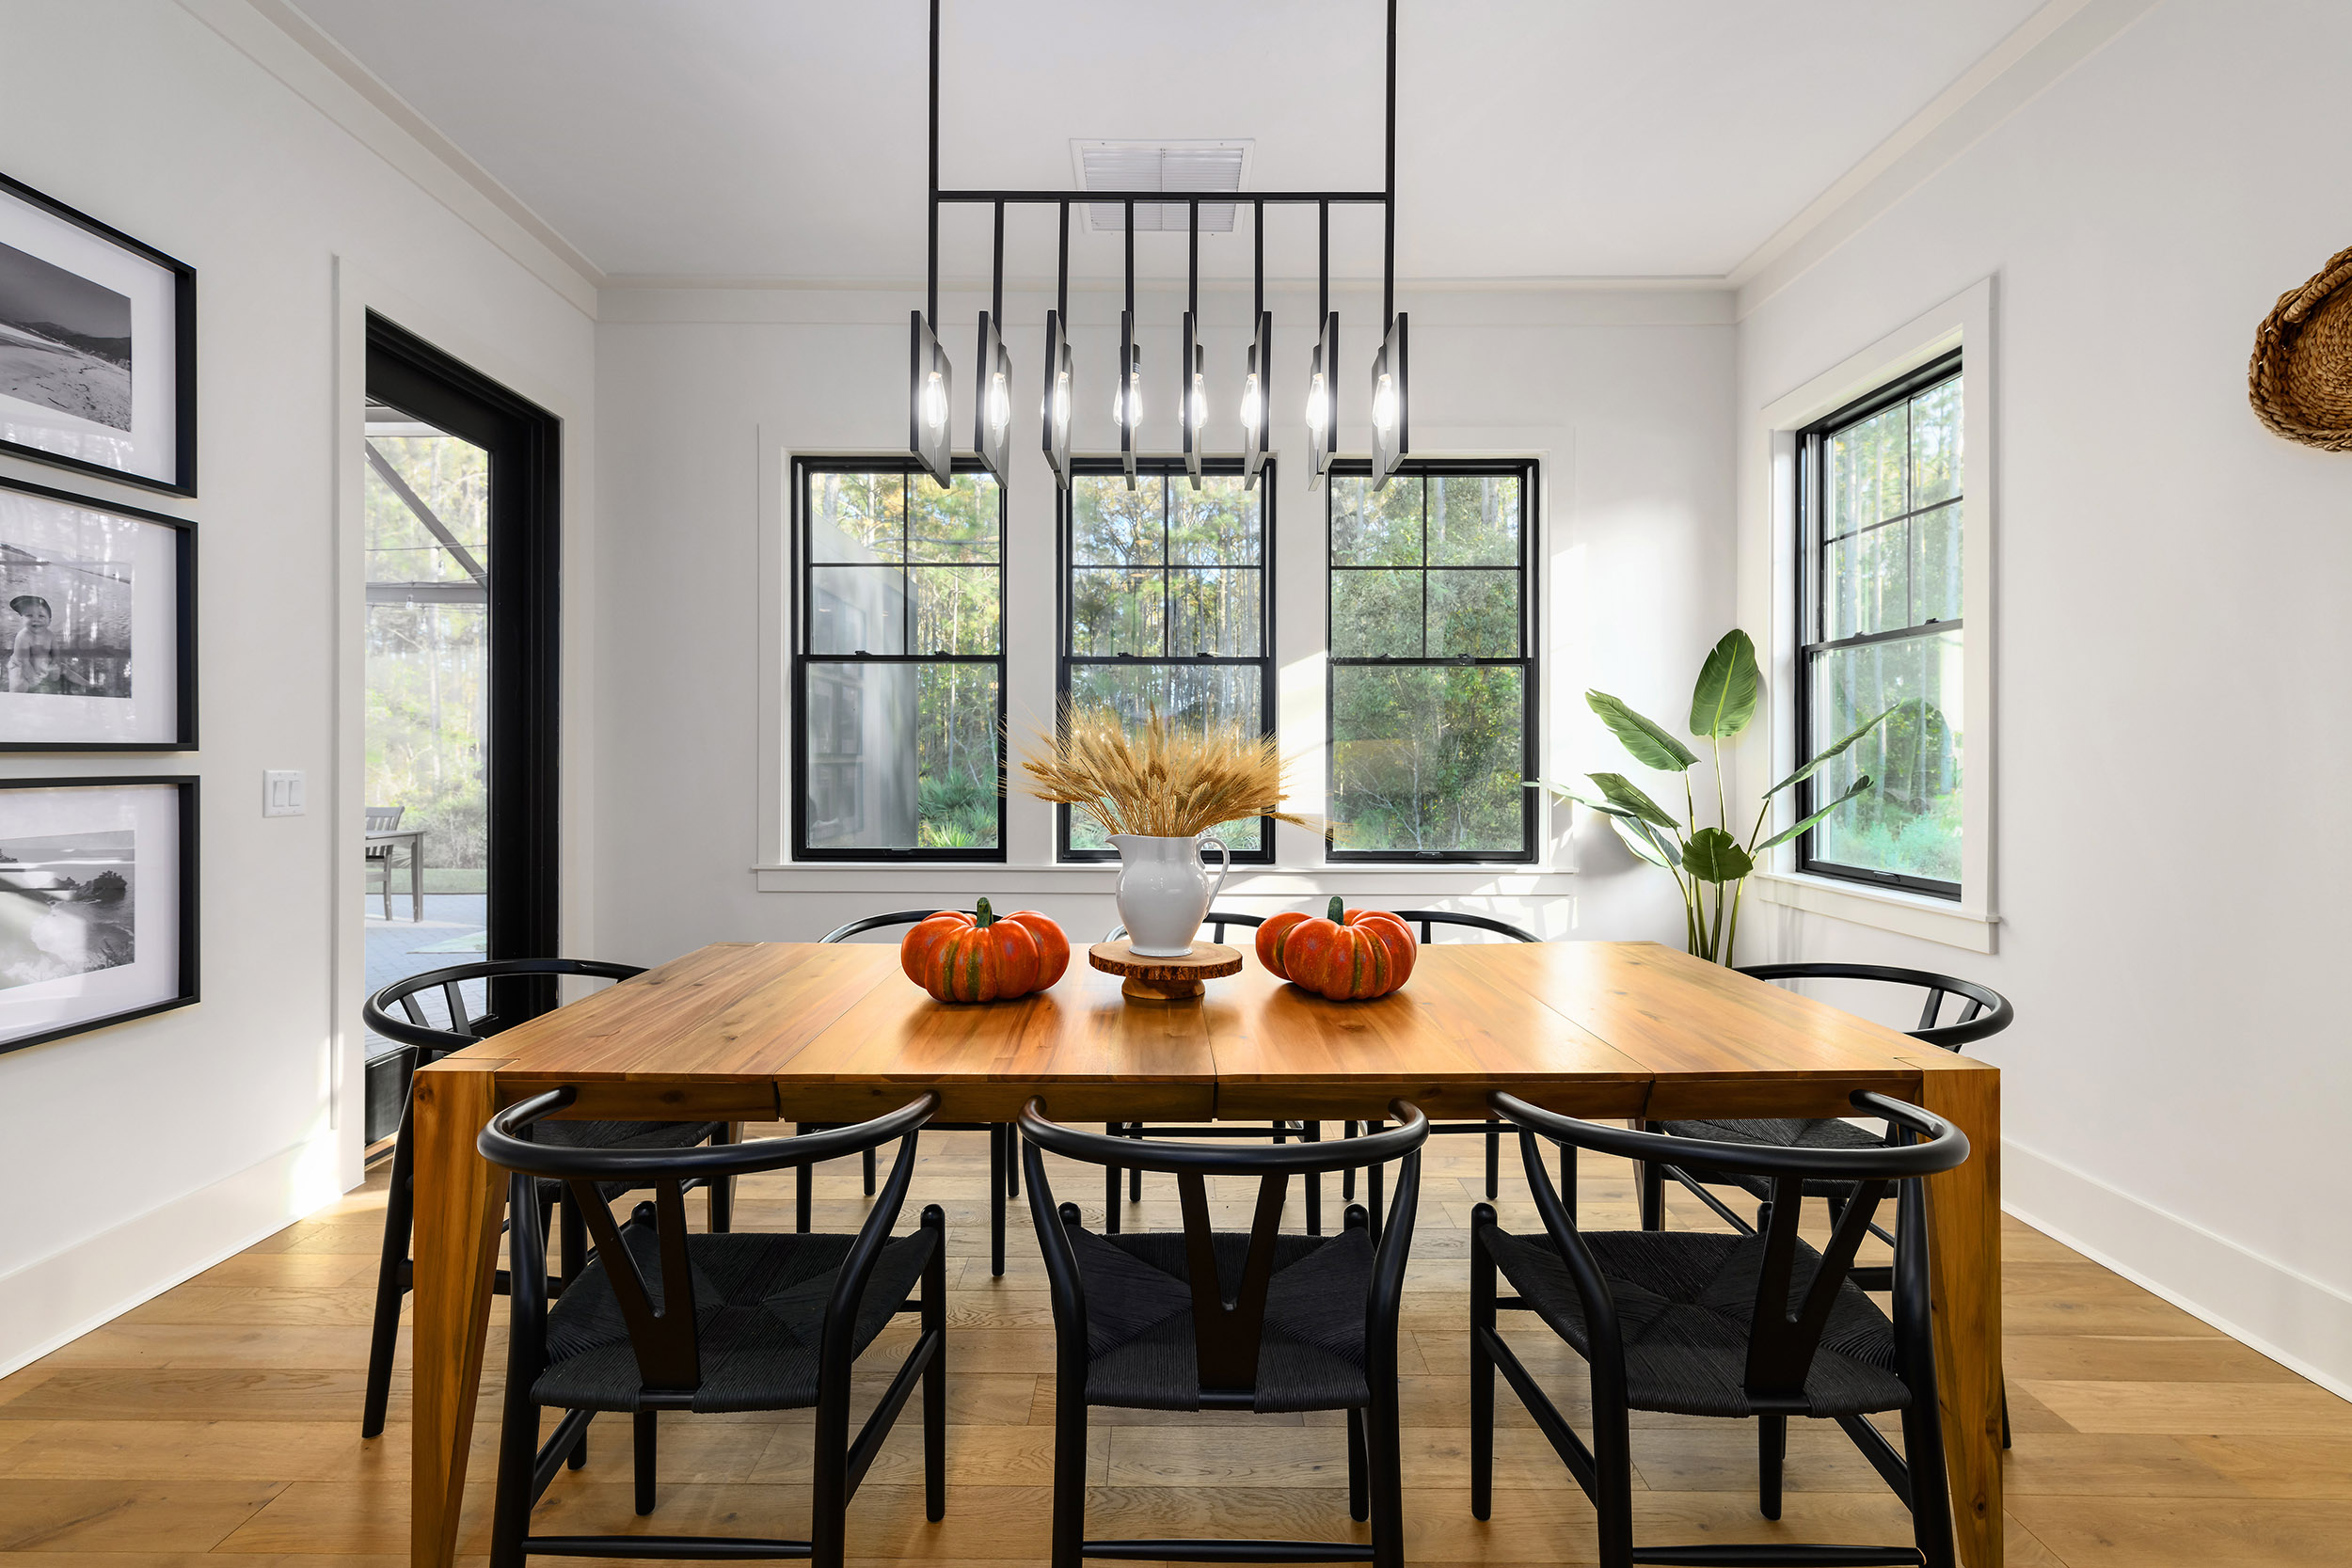 Decorating a dinning room for Fall